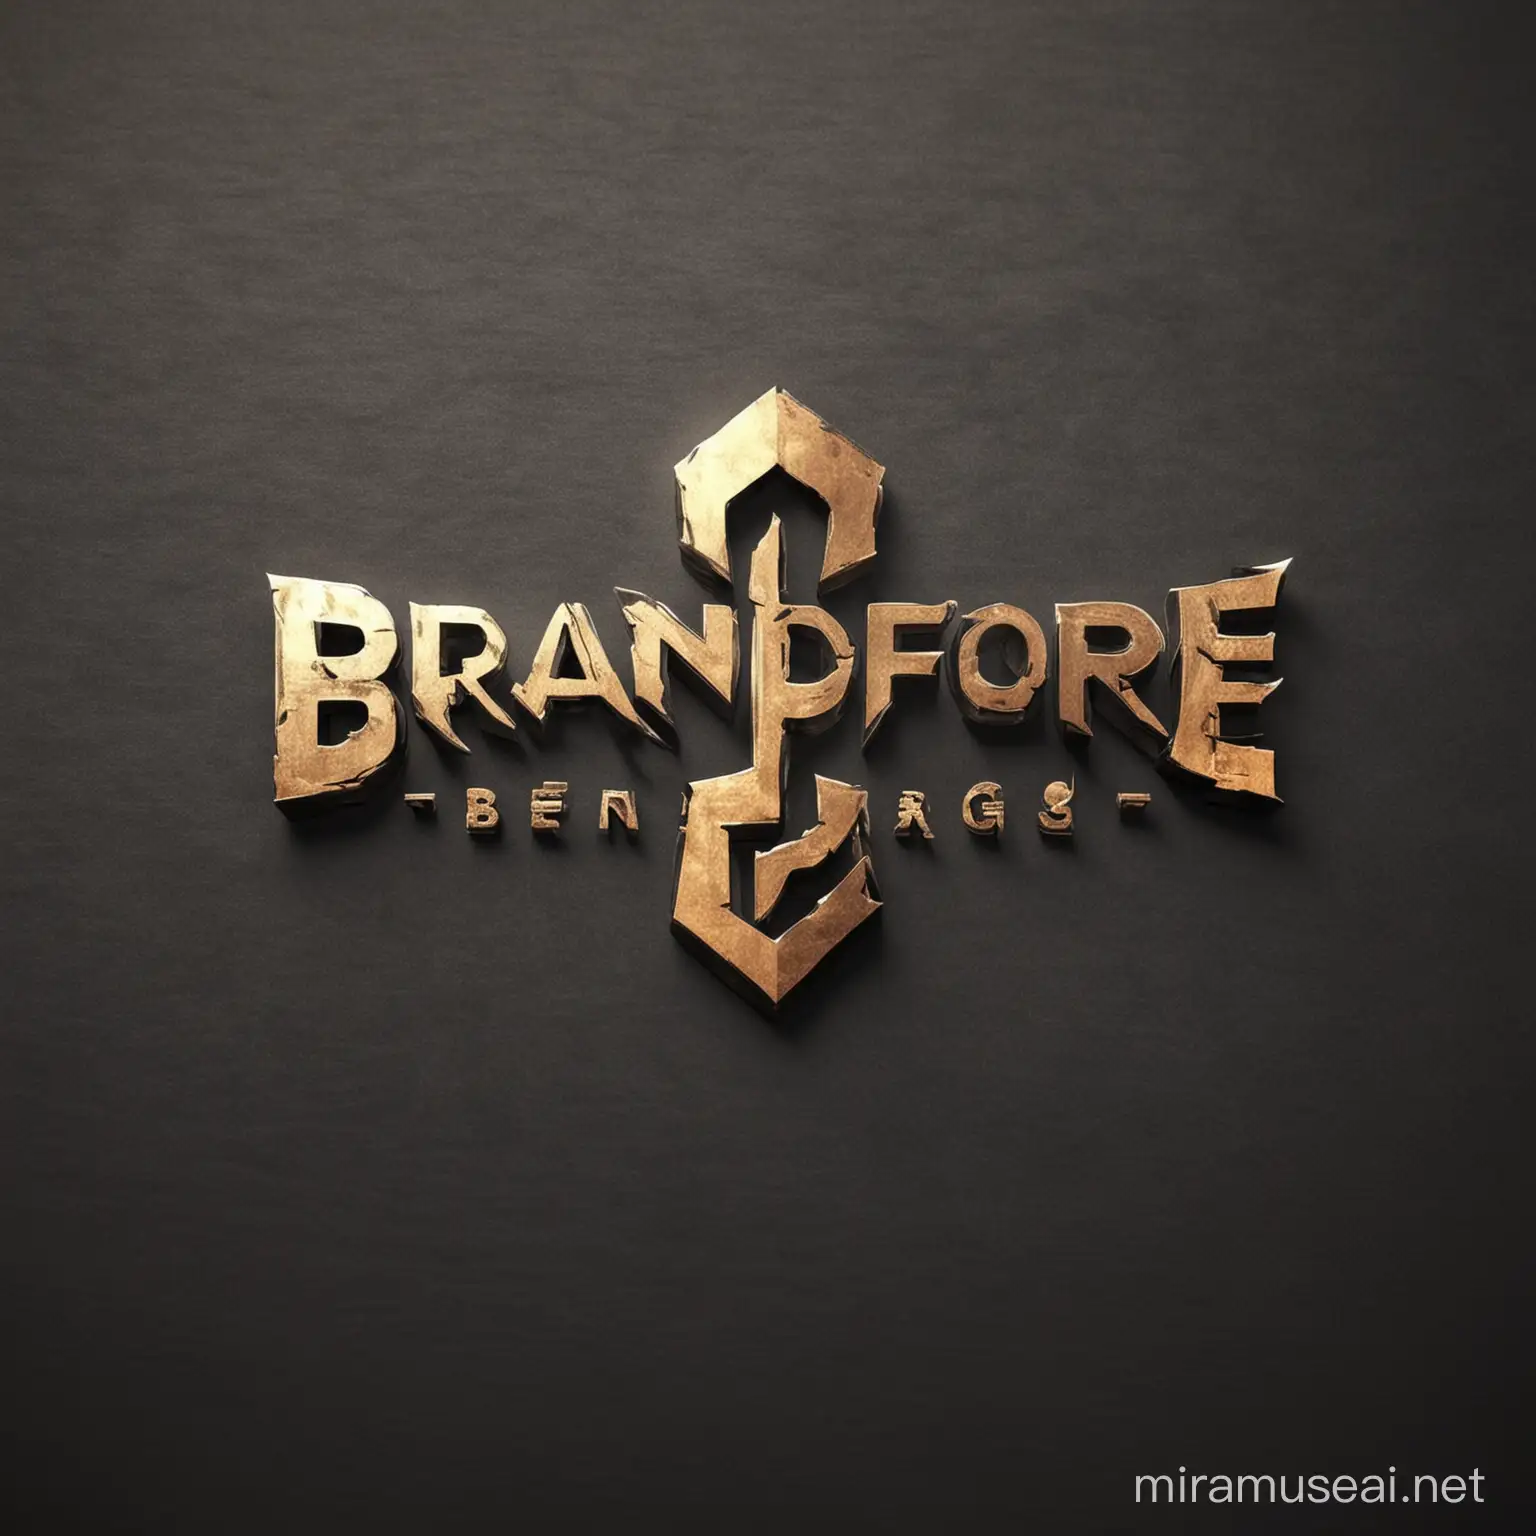 I want a logo design please. The company is called BrandForge. The business is a branding and design agency. The 5 words we pride our business on is Craftmanship, creation, Clarity, Culture, Community. The design should be slightly obscure, but very succinct. I want it to feel familiar but refreshingly modern, but with a metallic industrial edge